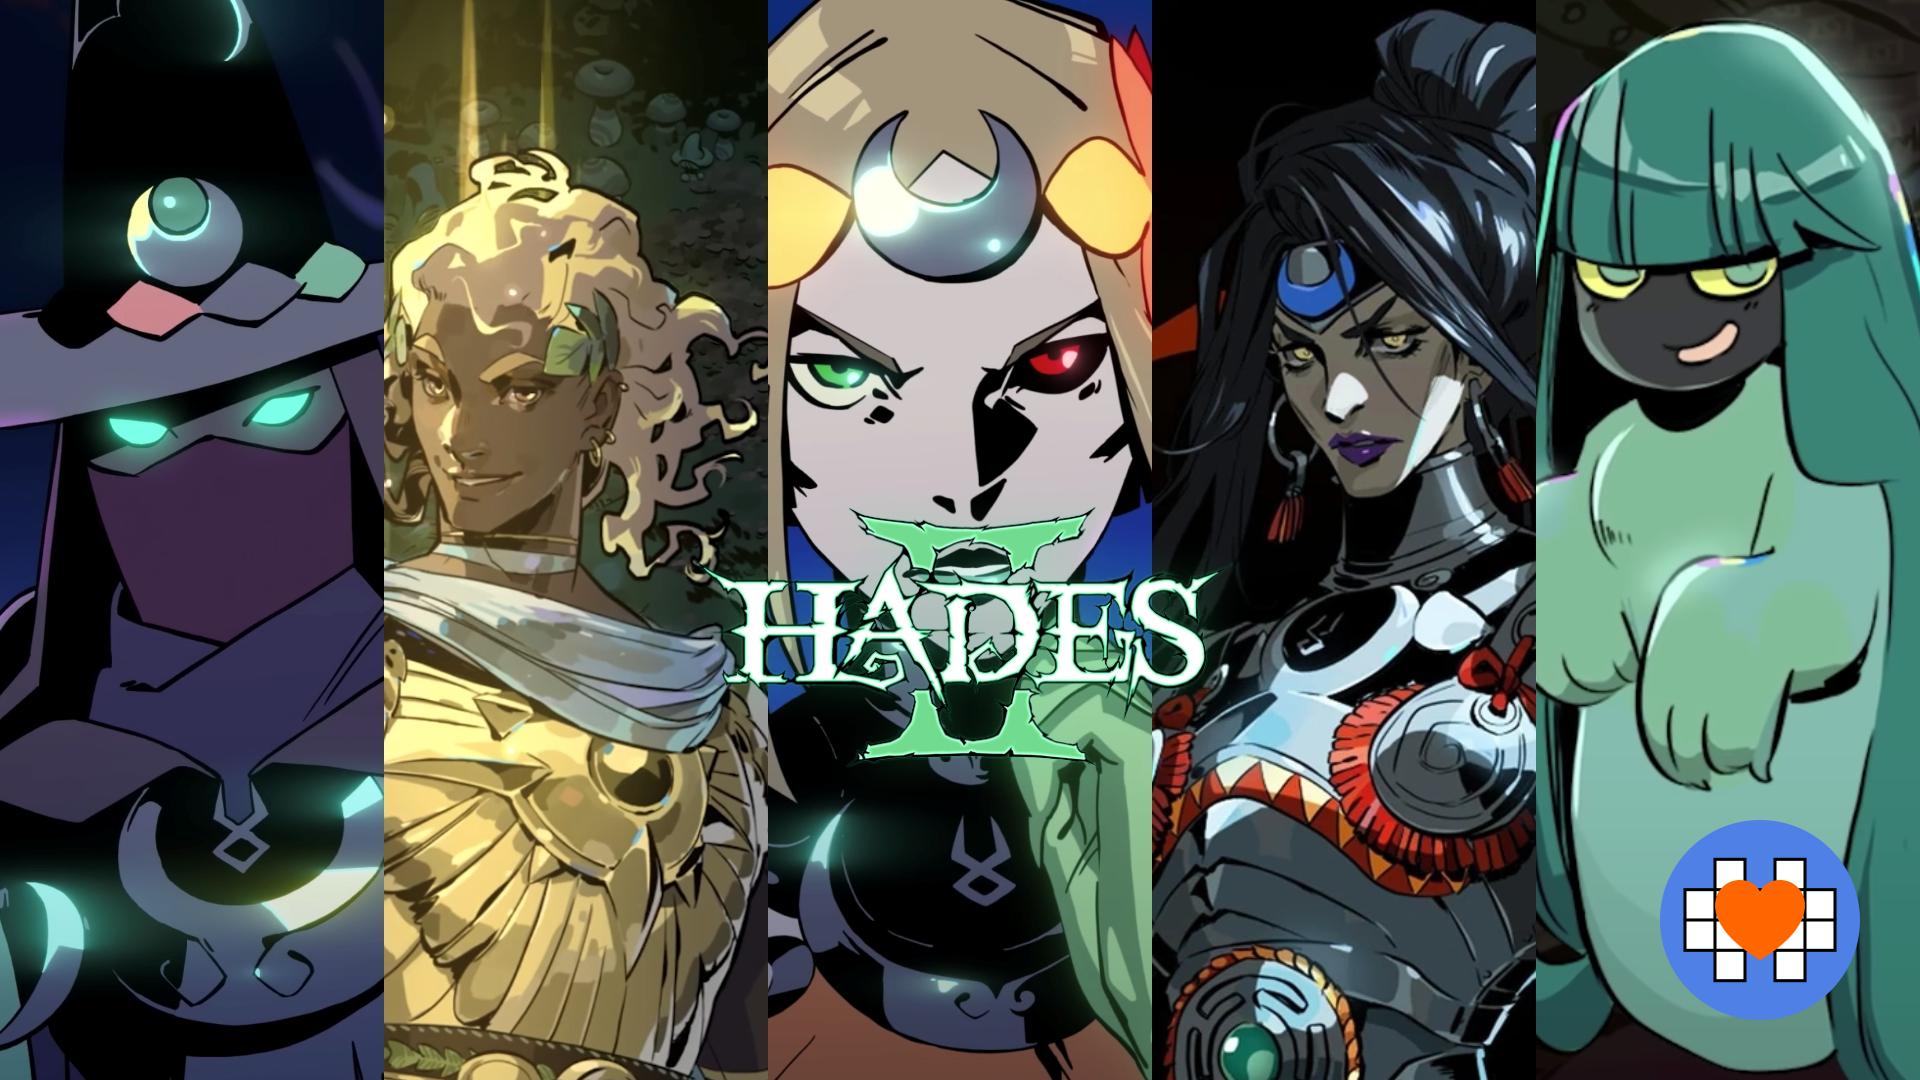 Hades 2 Trailer Weapons 